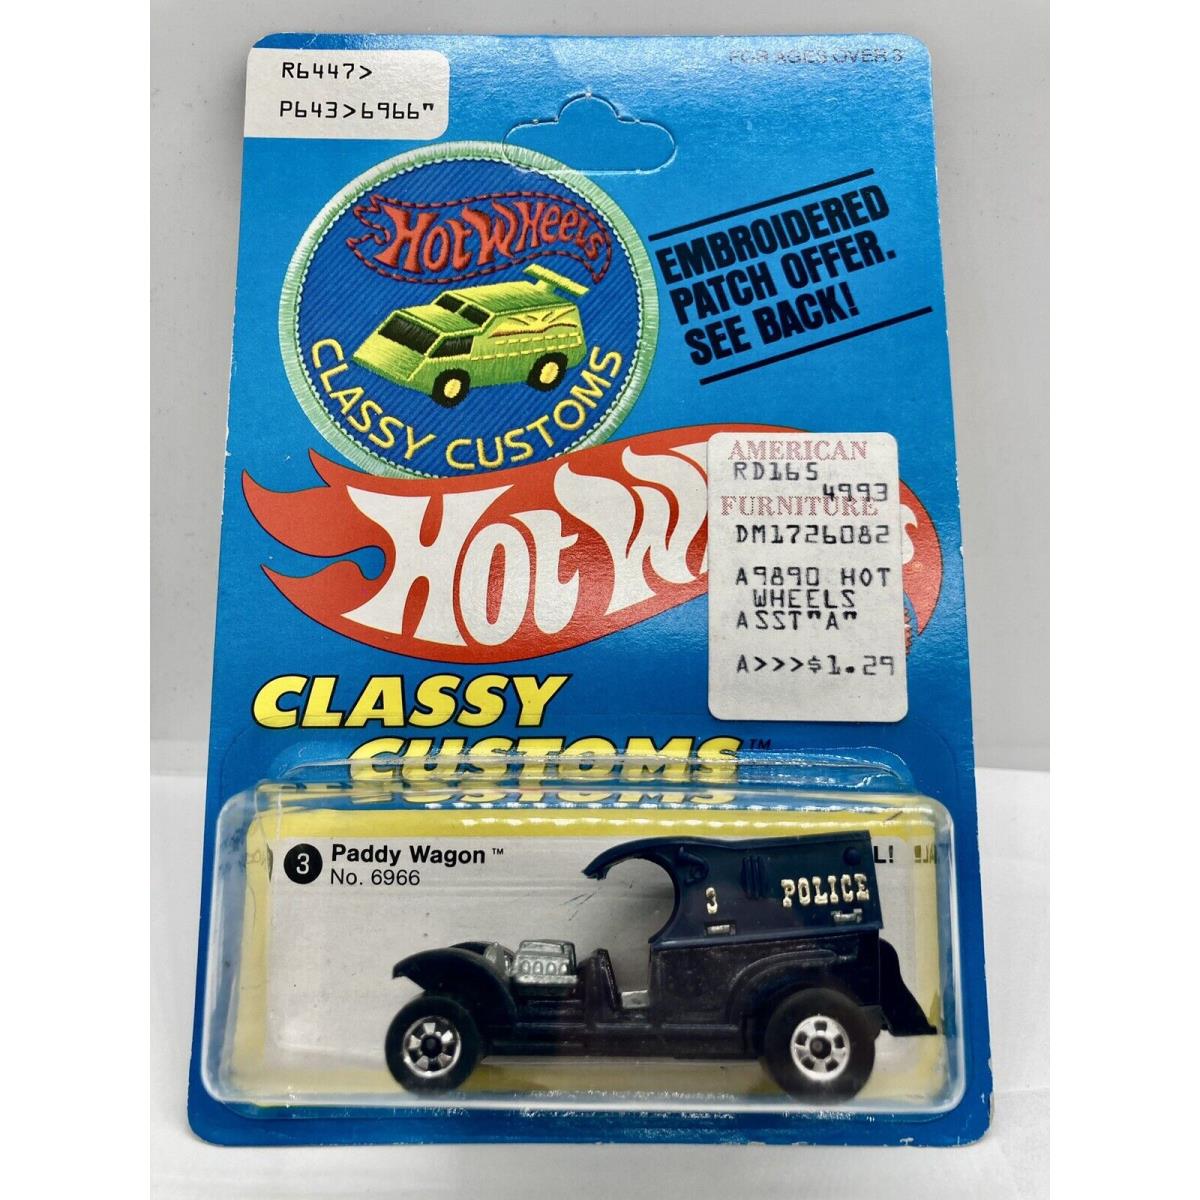 Paddy Wagon Hot Wheels 1977 bw Unpunched Classy Customs Patch Card No 6966